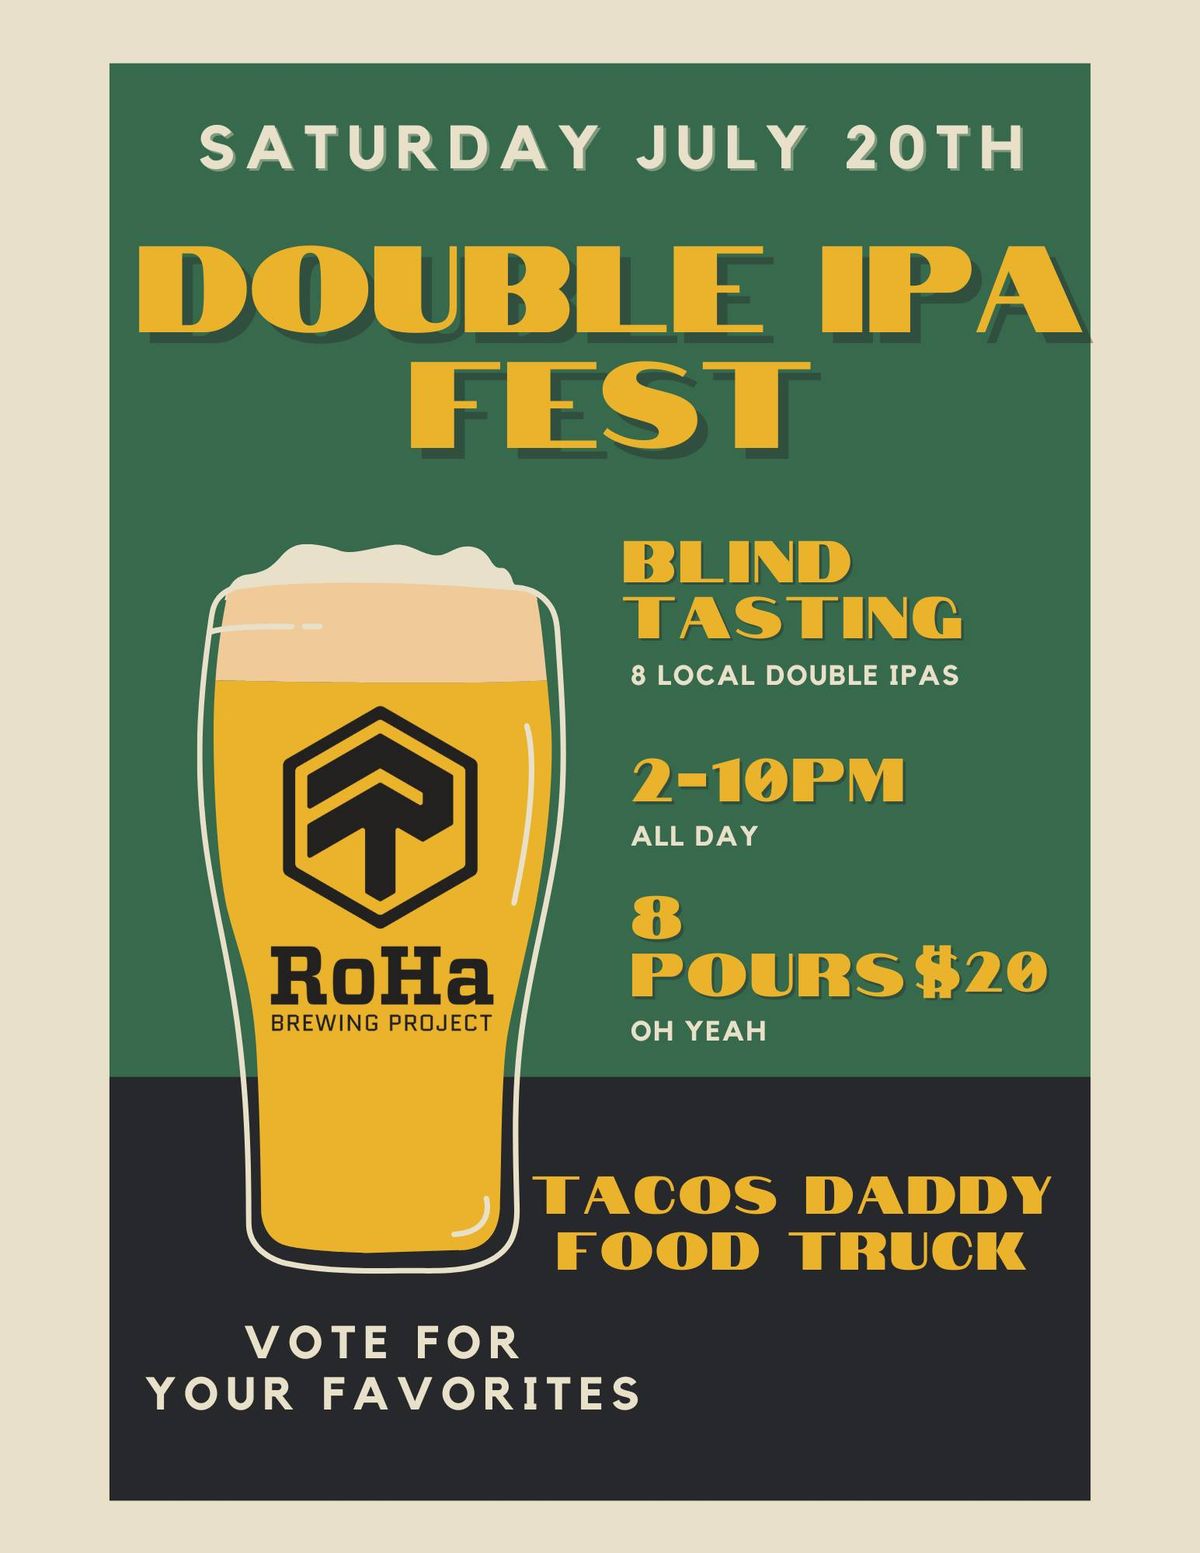 Double IPA Festival and Blind Tasting